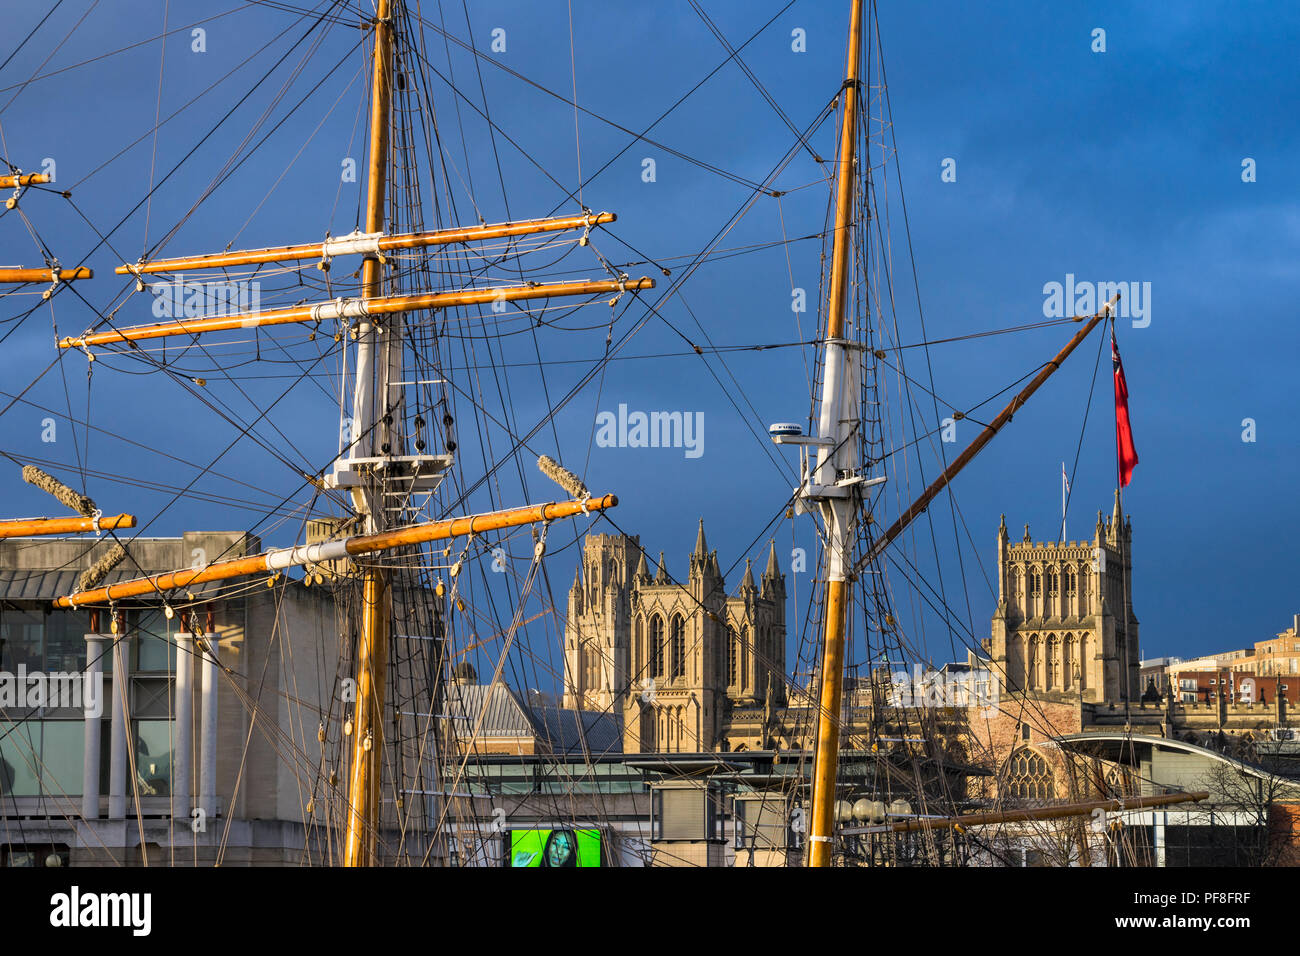 Bristol Cathedral - The Cathedral Church of the Holy and Undivided Trinity - framed by the masts of the Tall Ship Kaskelot, Bristol, England Stock Photo